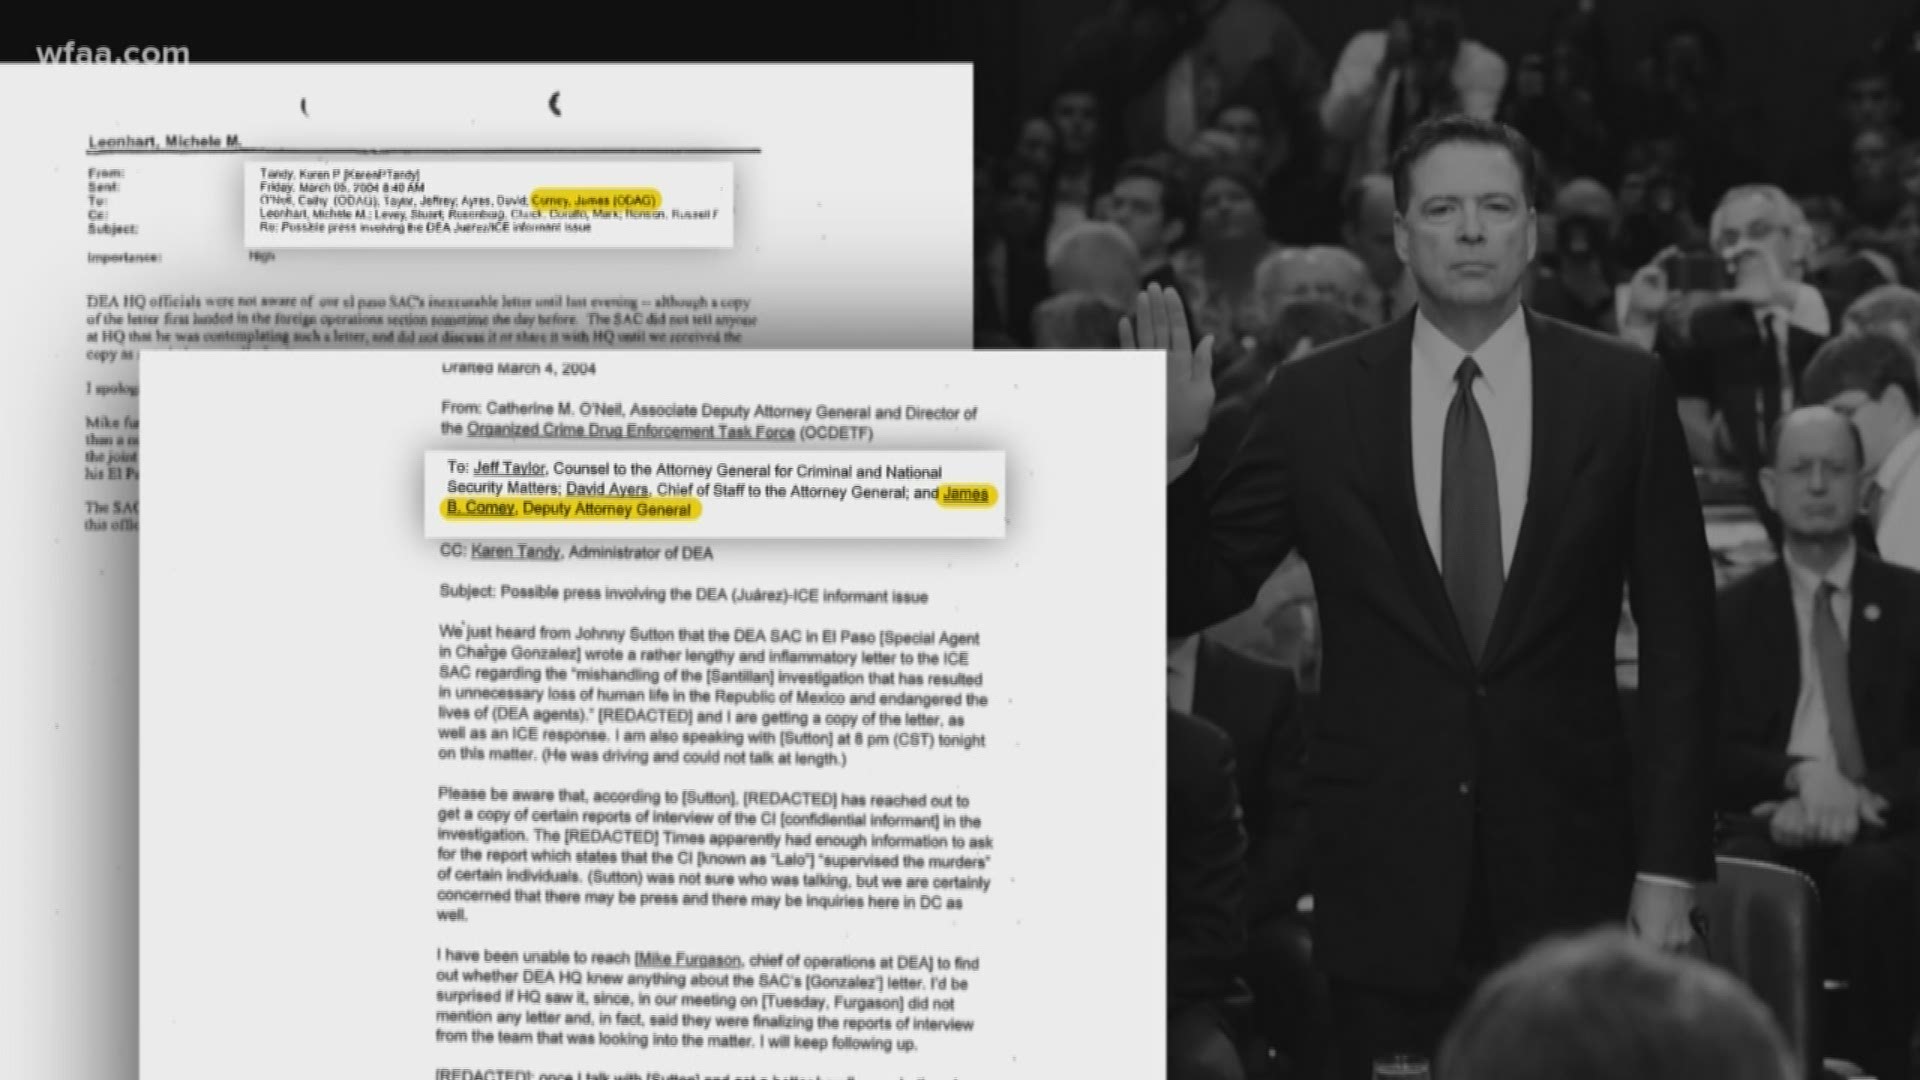 Unredacted emails recently obtained by WFAA show that James Comey - at the time a Deputy U.S. Attorney General in 2004 - was apparently made aware that a federal drug informant was playing a role in cartel murders.